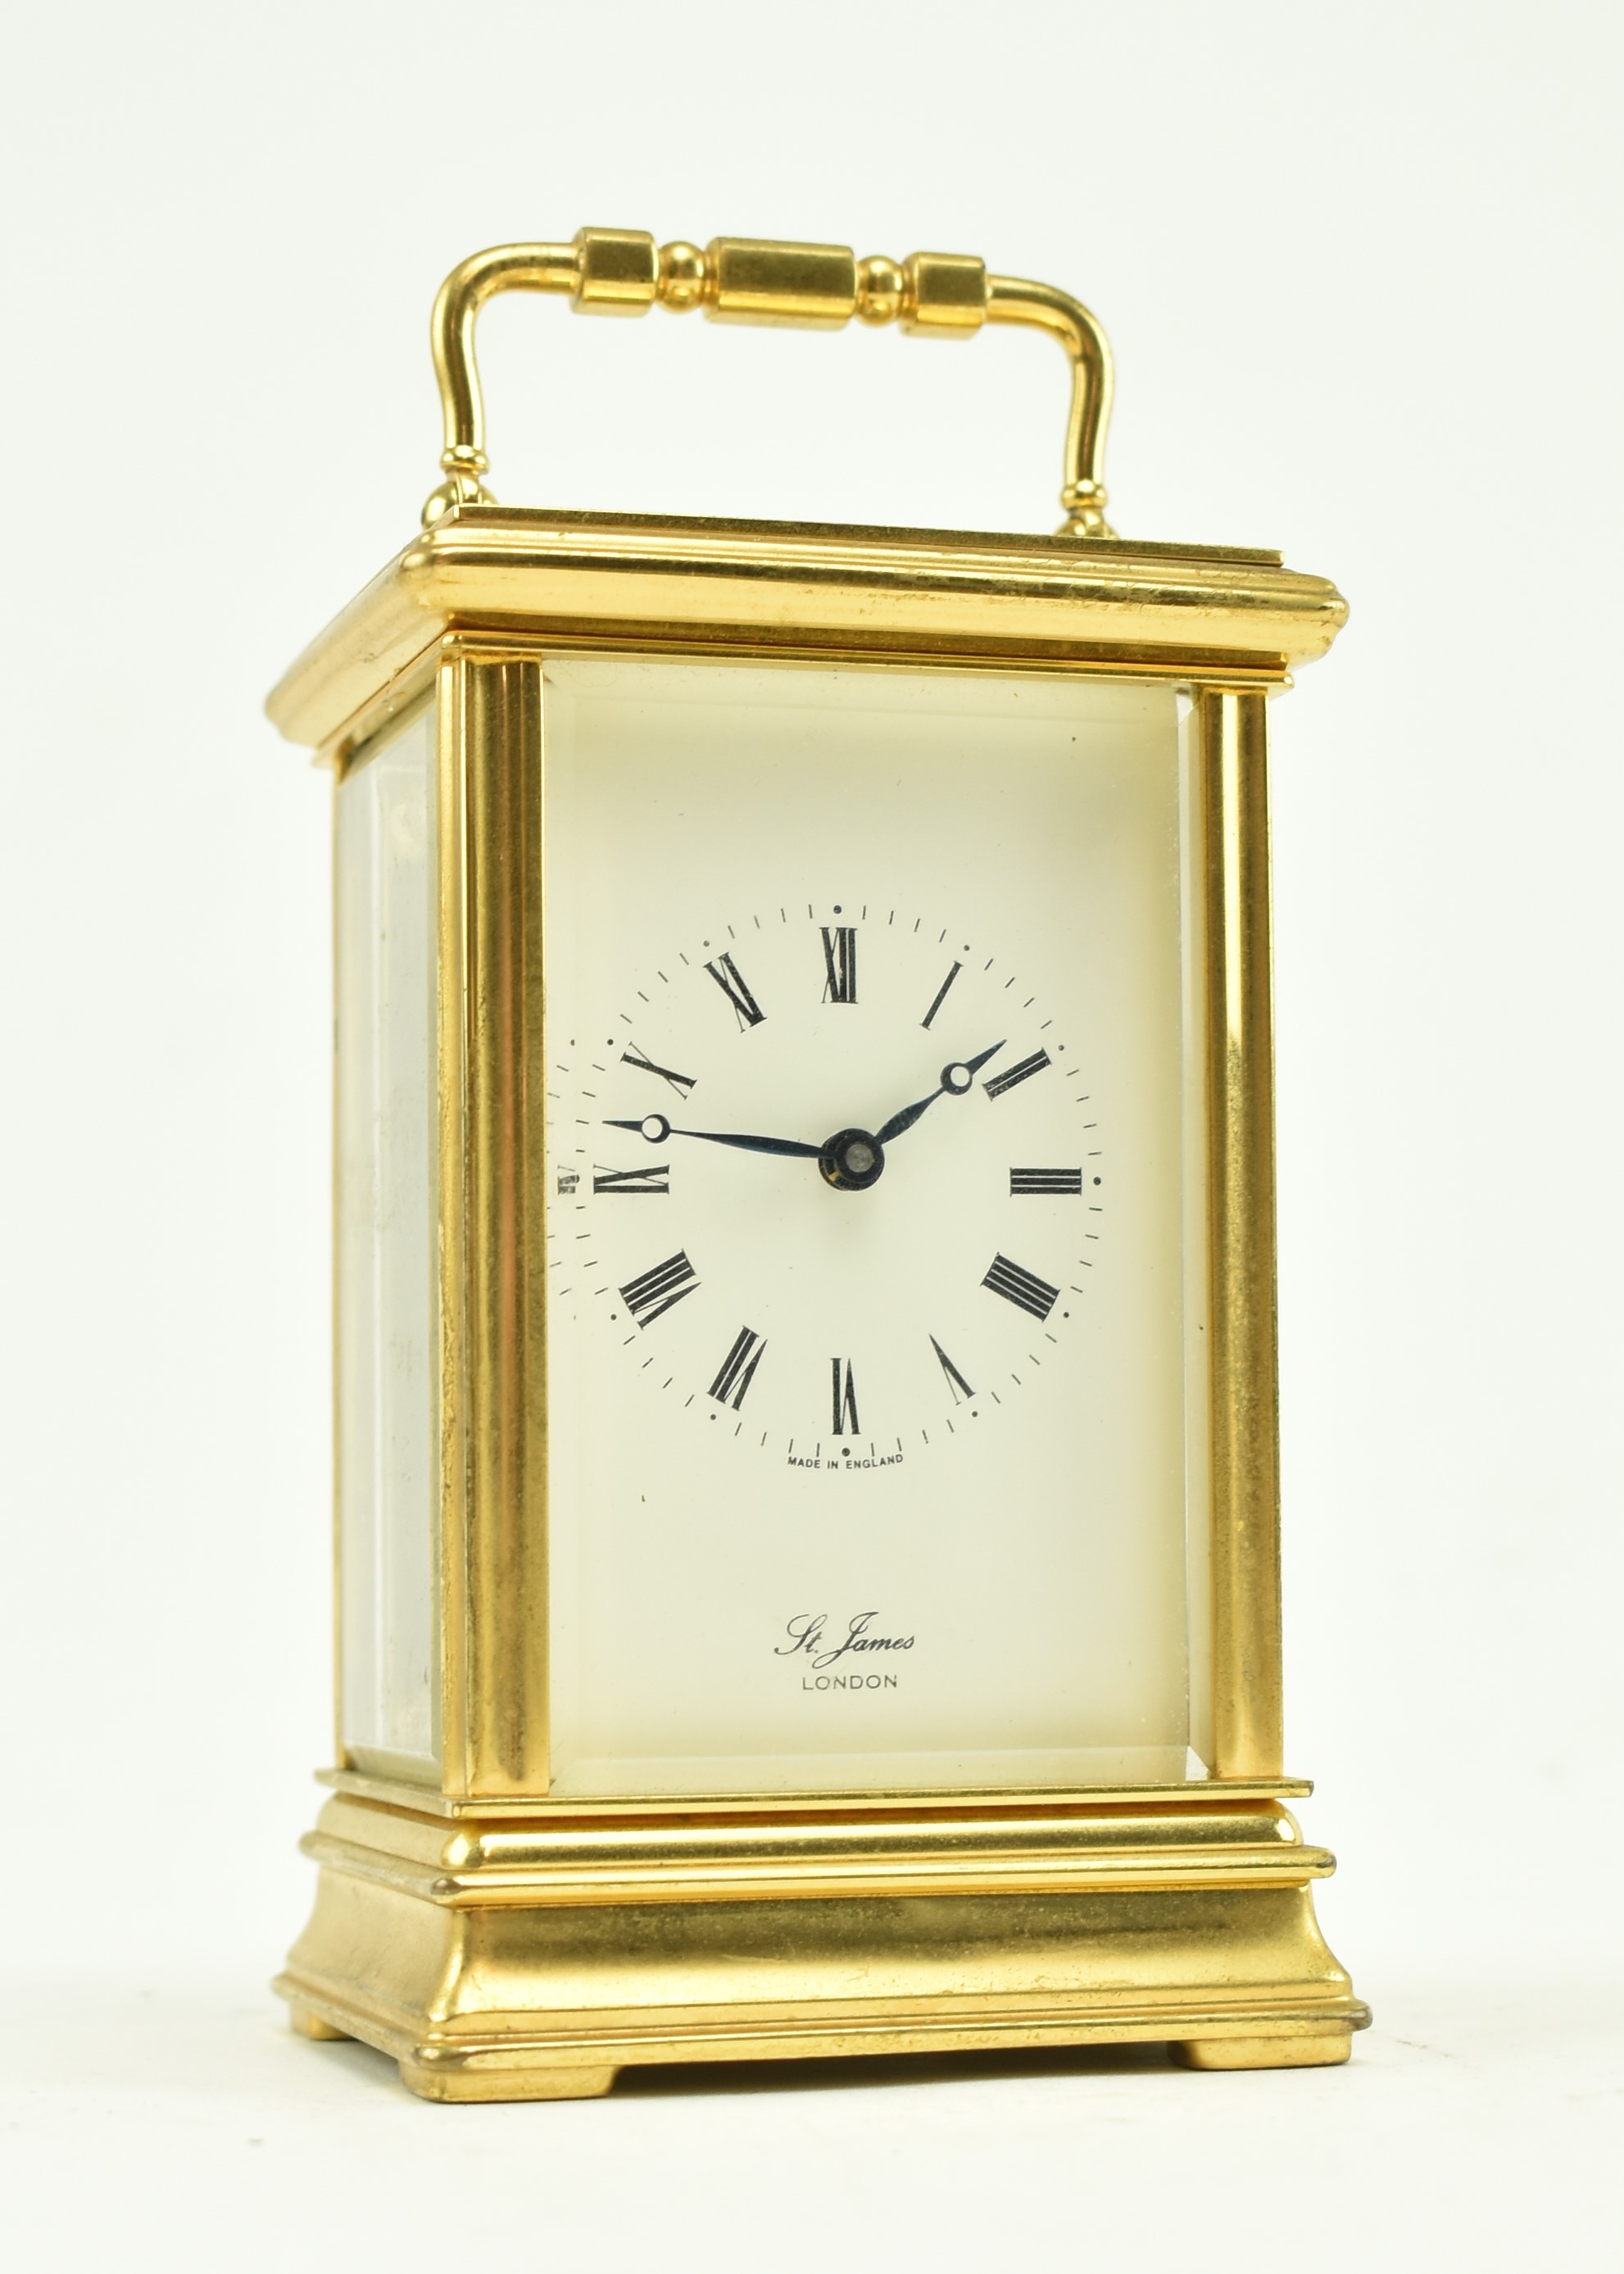 ST. JAMES BRASS REPEATING MANTLEPIECE CARRIAGE CLOCK